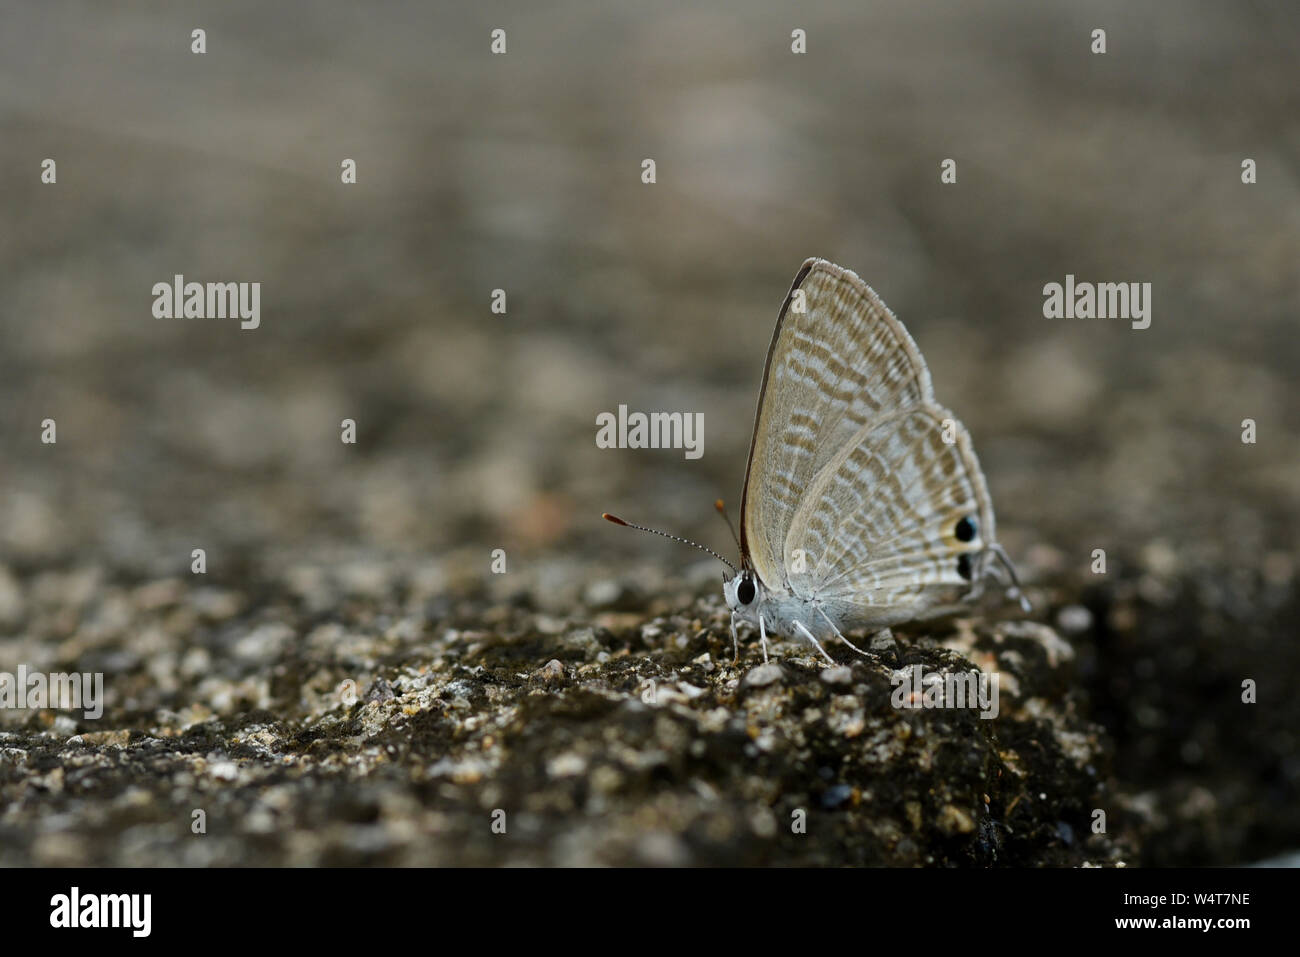 Butterfly on the ground, Indonesia Stock Photo